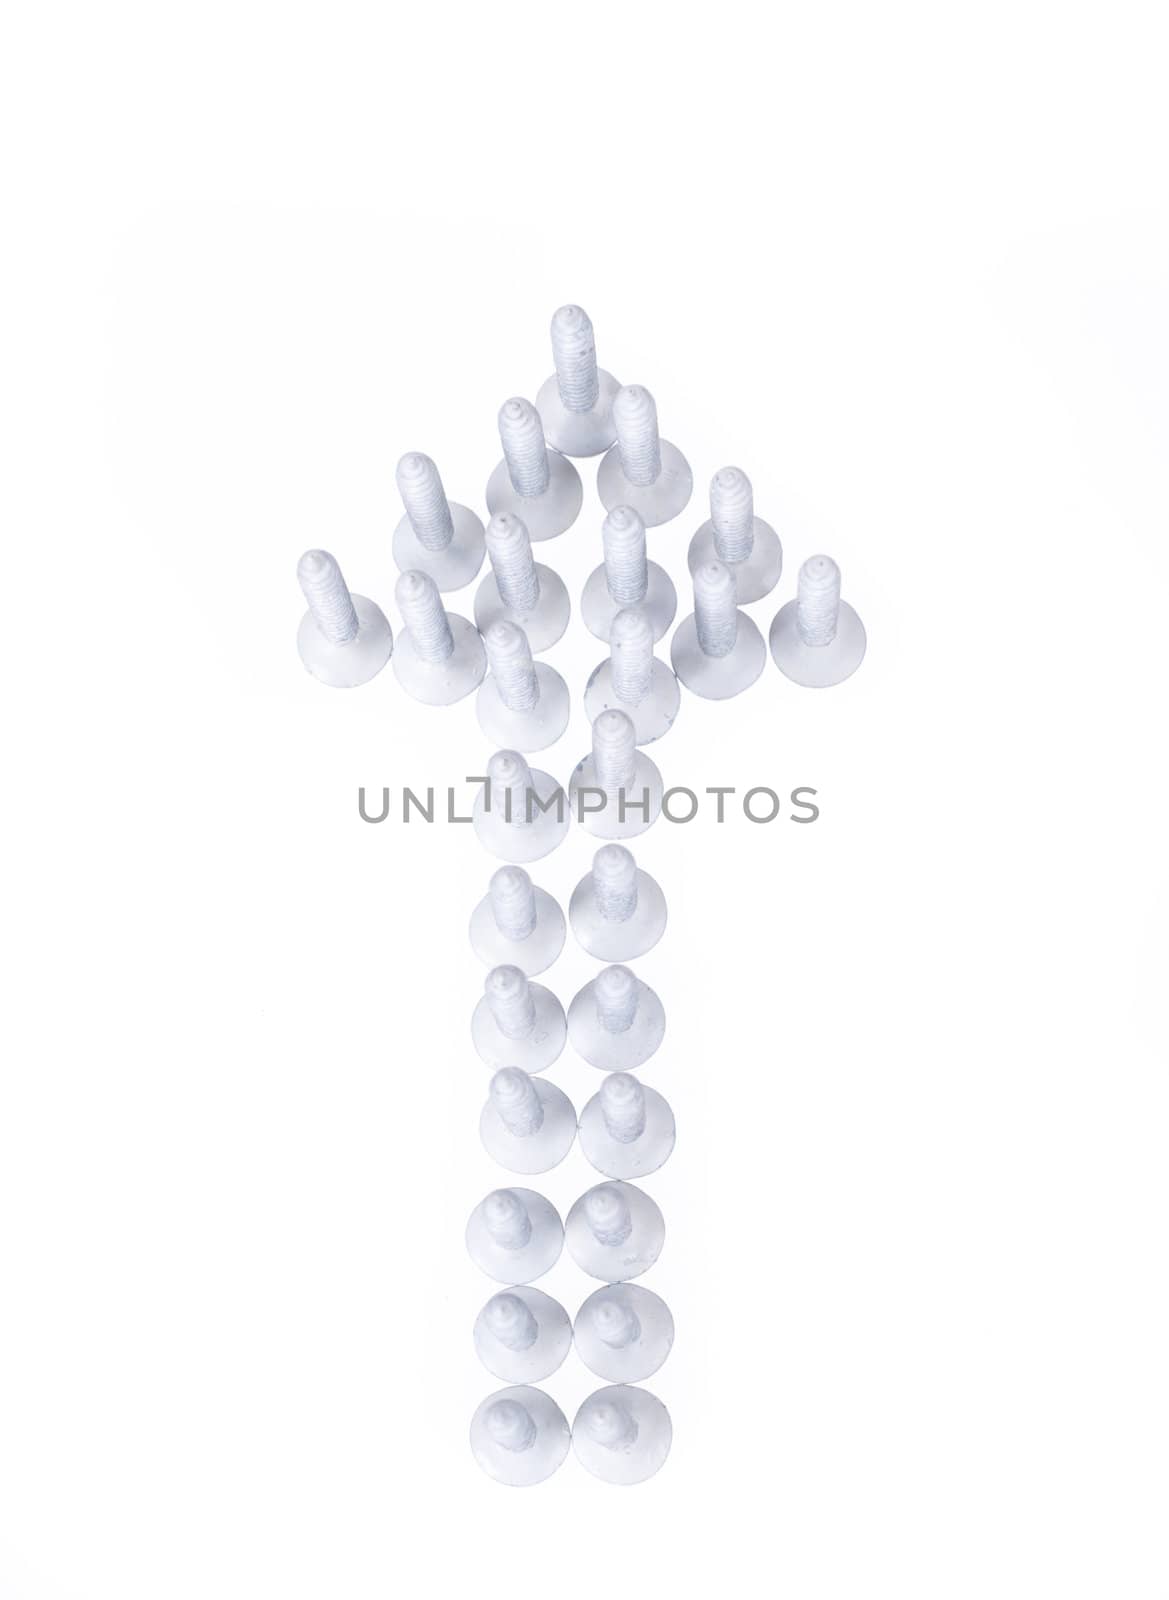 Arrow from screws
isolated with white background